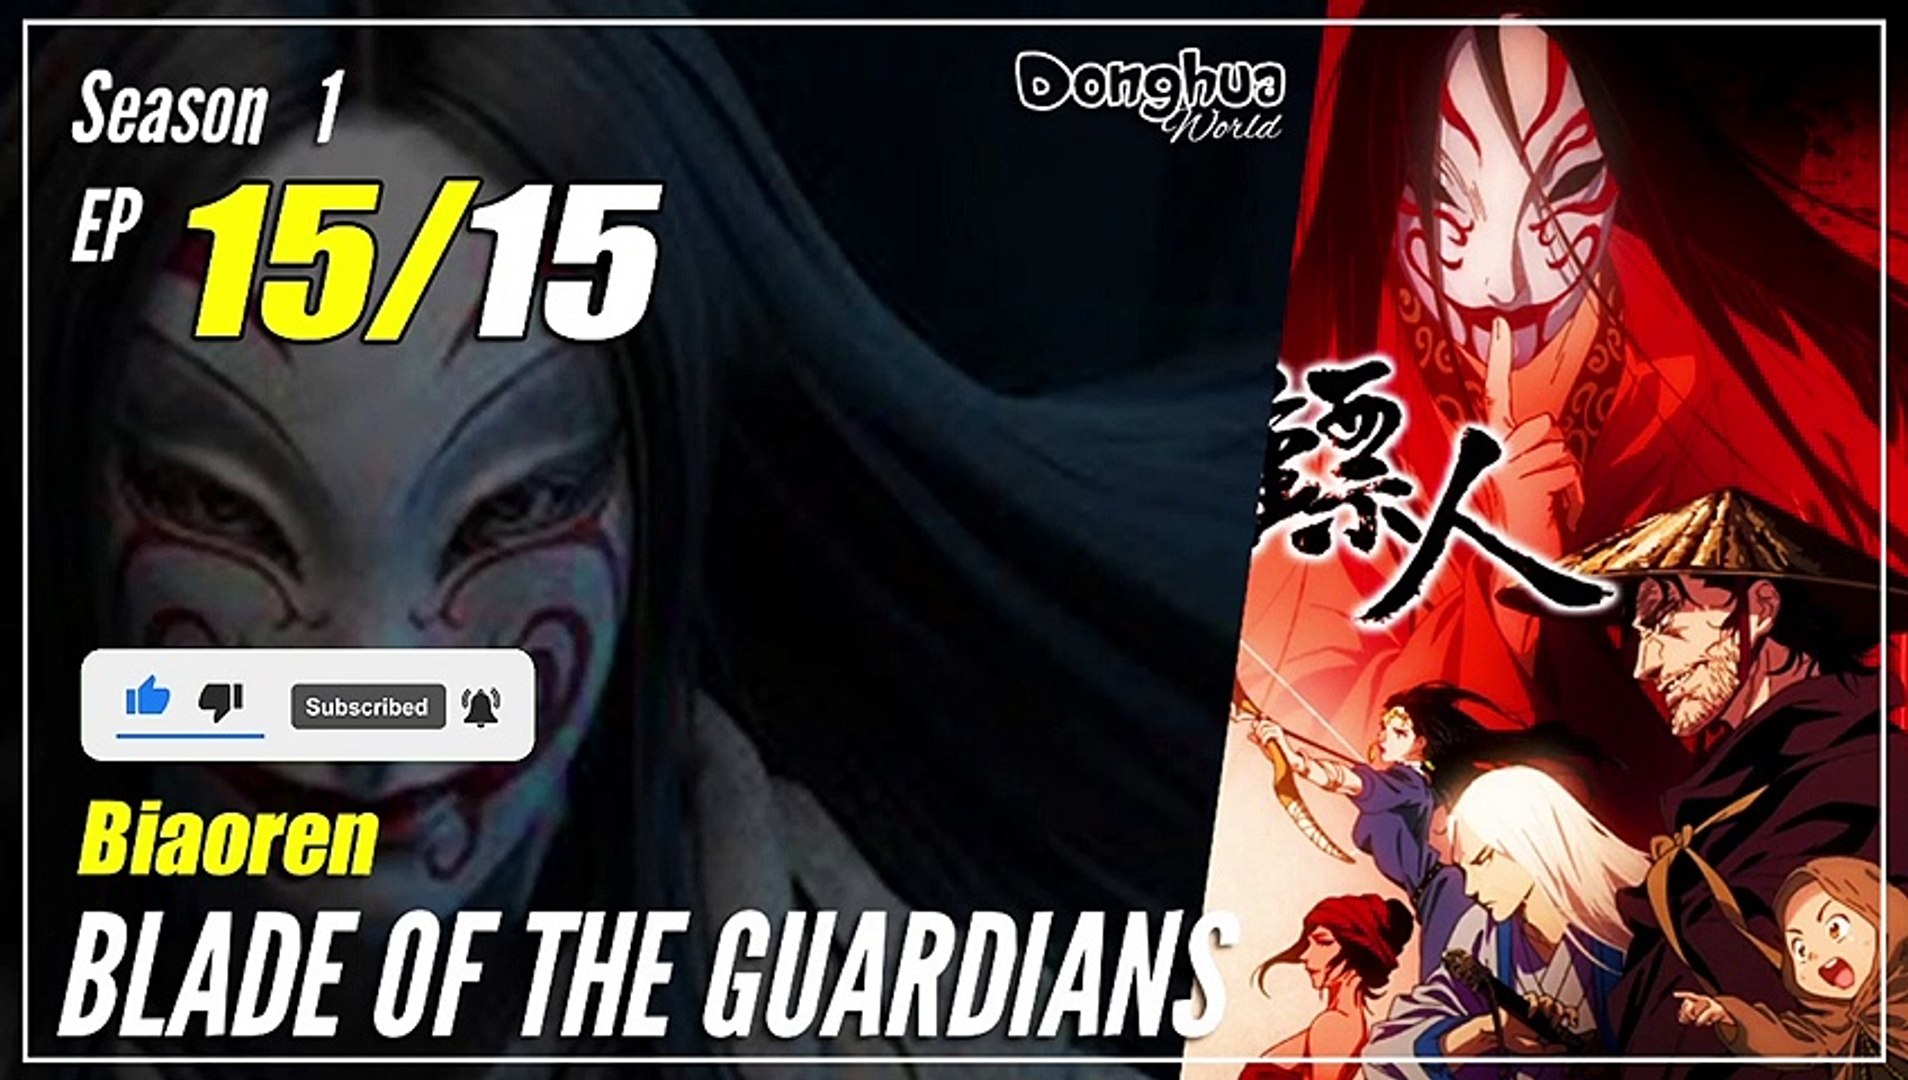 Biao Ren】 Season 1 EP 15 END - Blade Of The Guardians